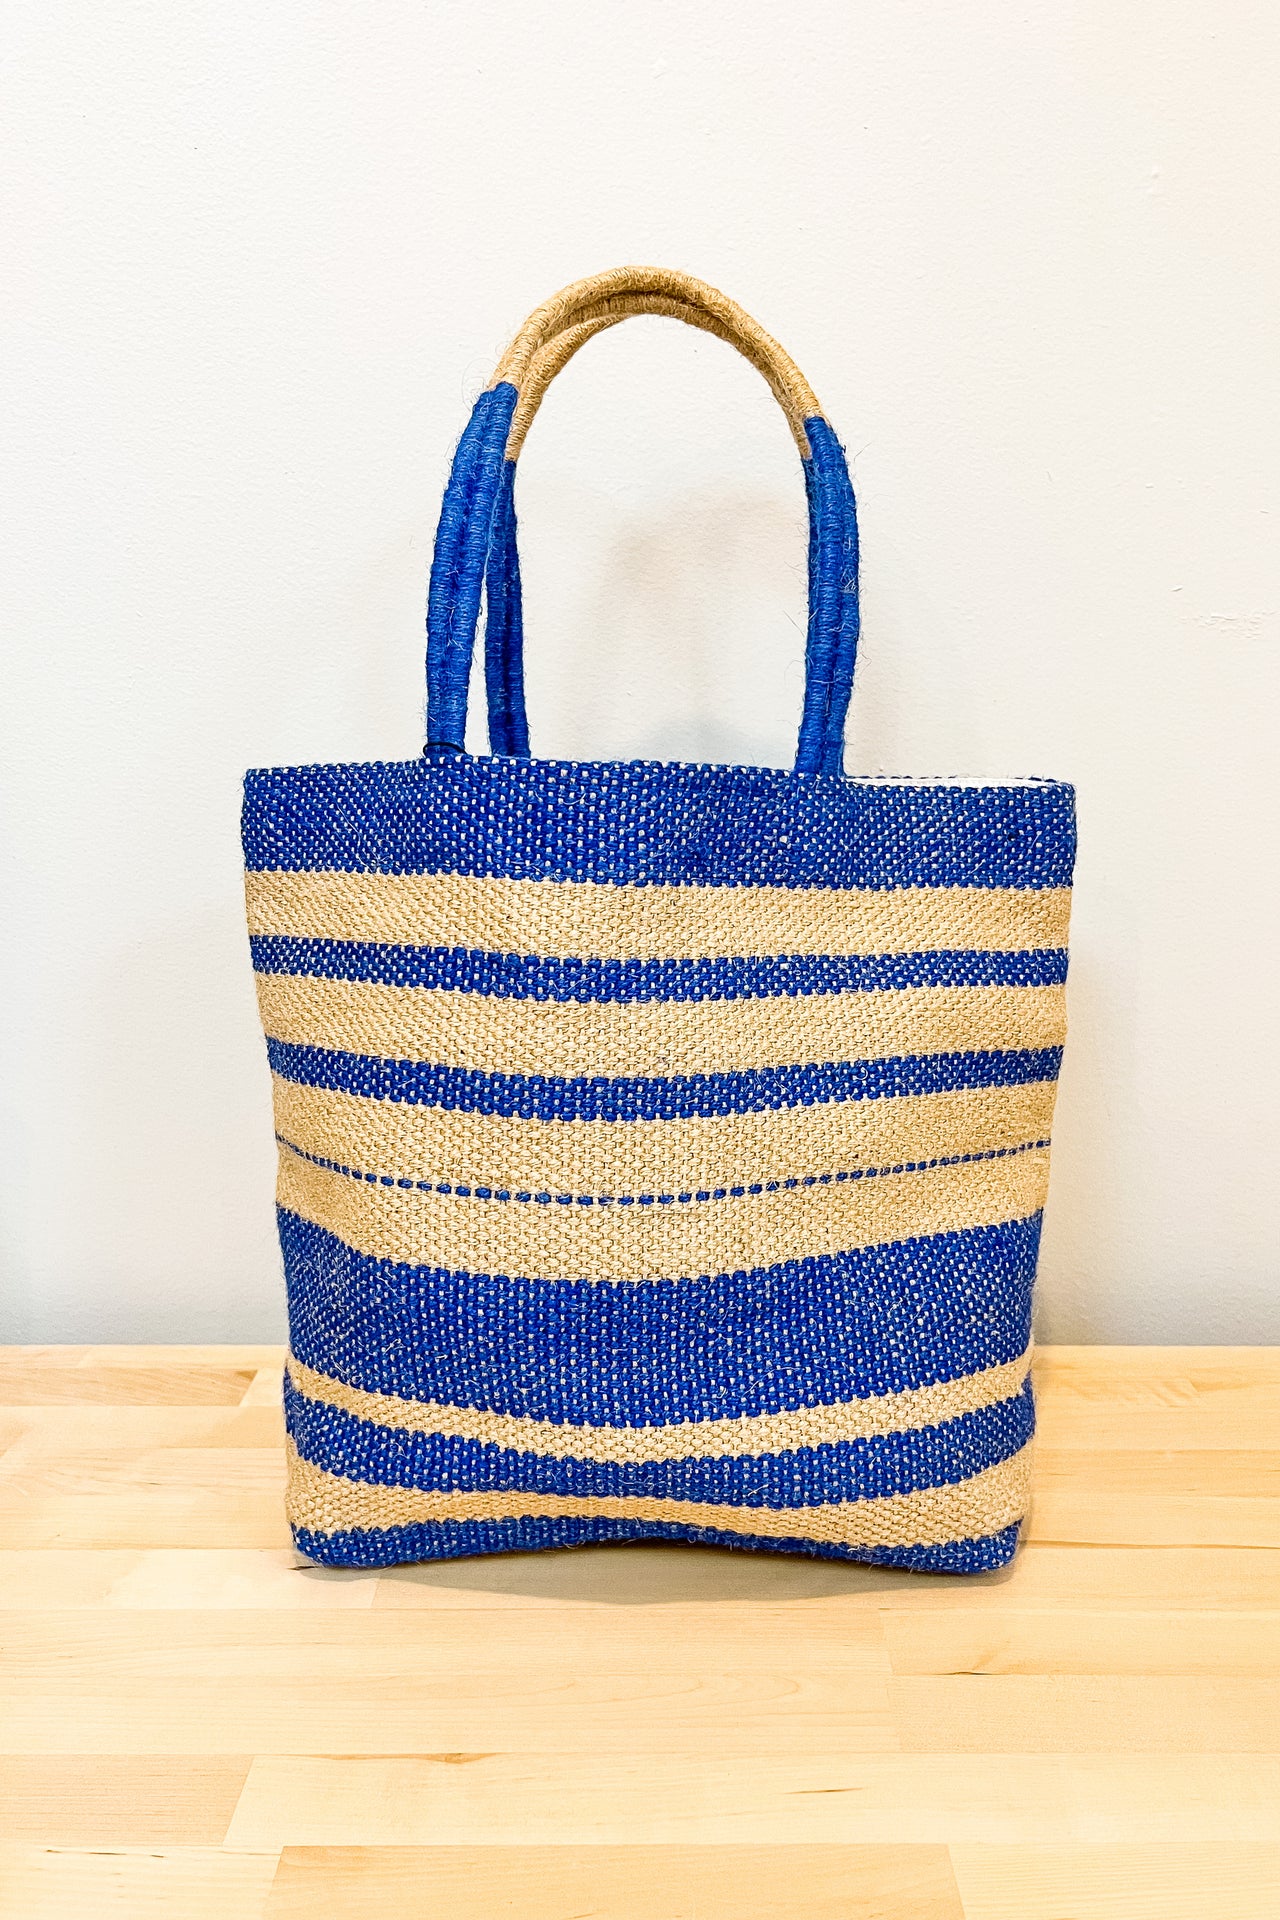 Light Blue Tote Fairtrade Plastic Bag Handwoven Recycled 